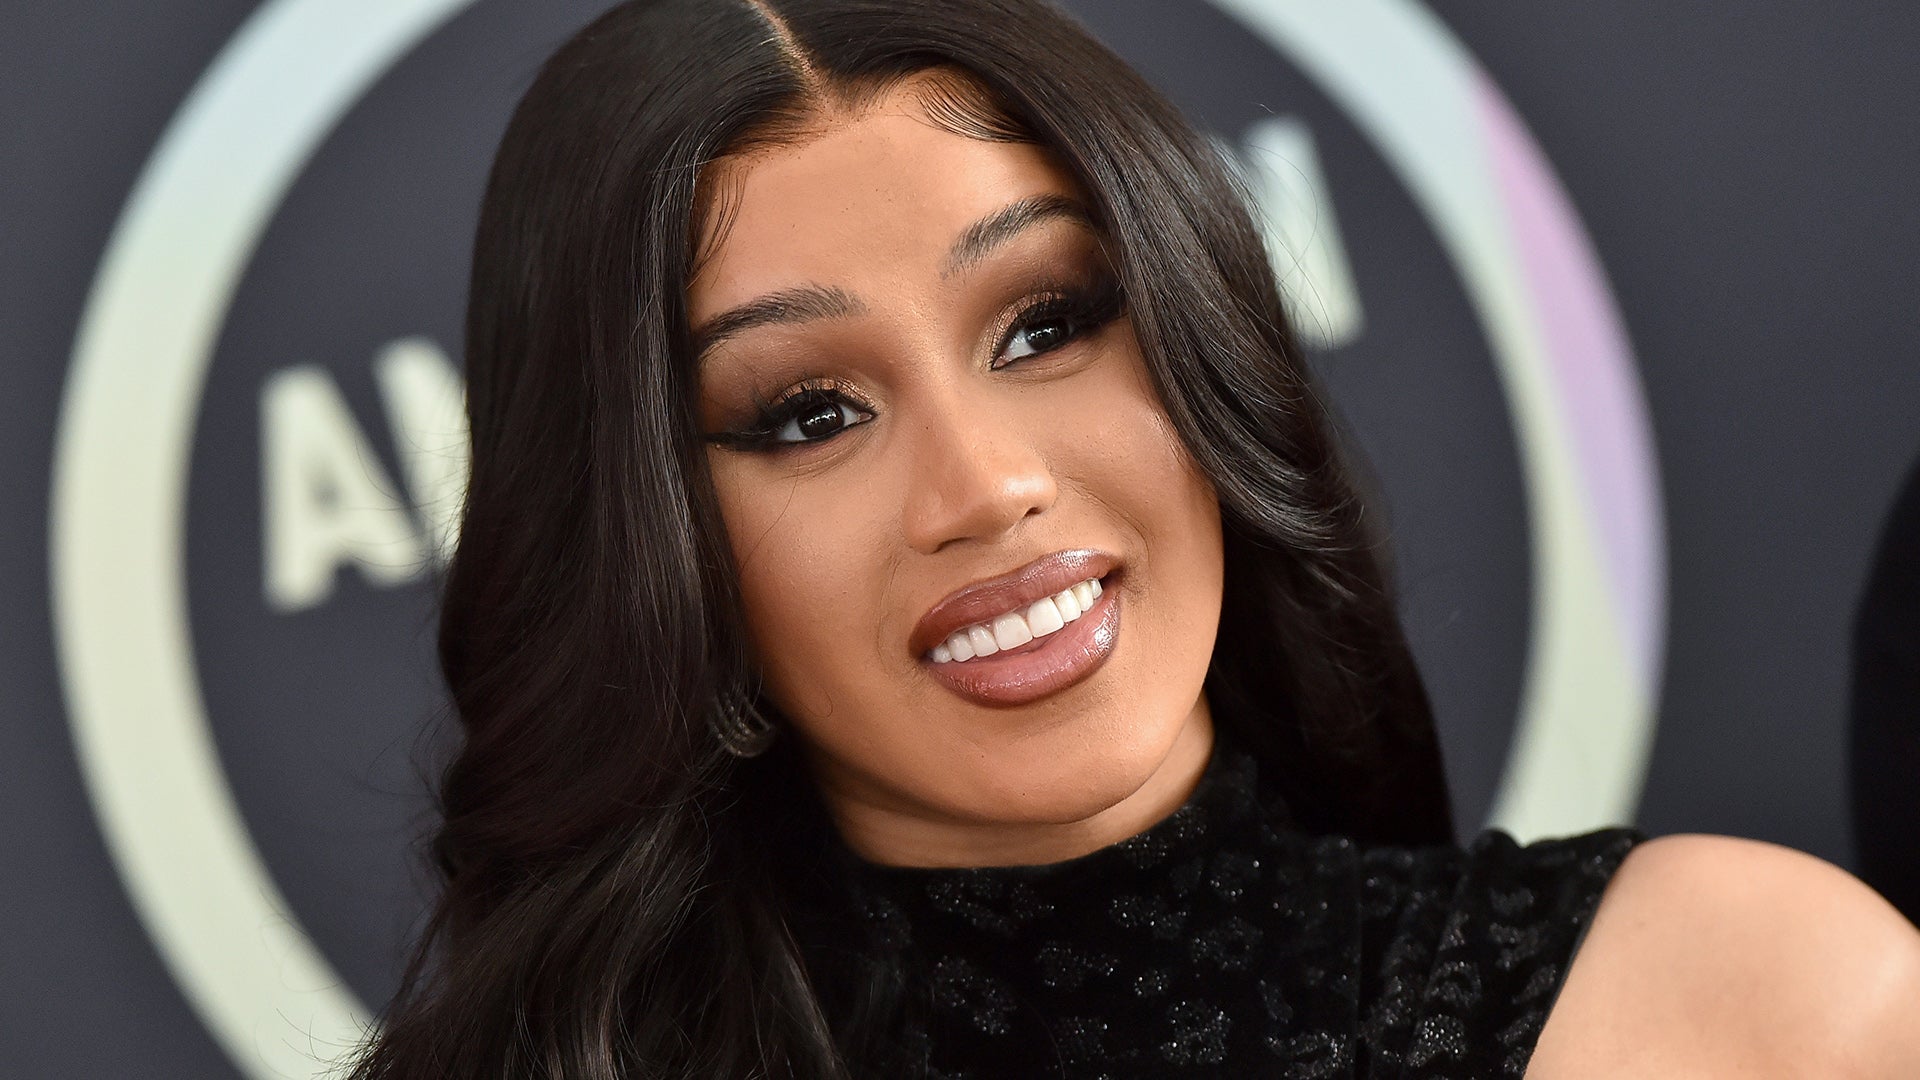 What Does Cardi B's Face Tattoo Say? It's A Touching Tribute To